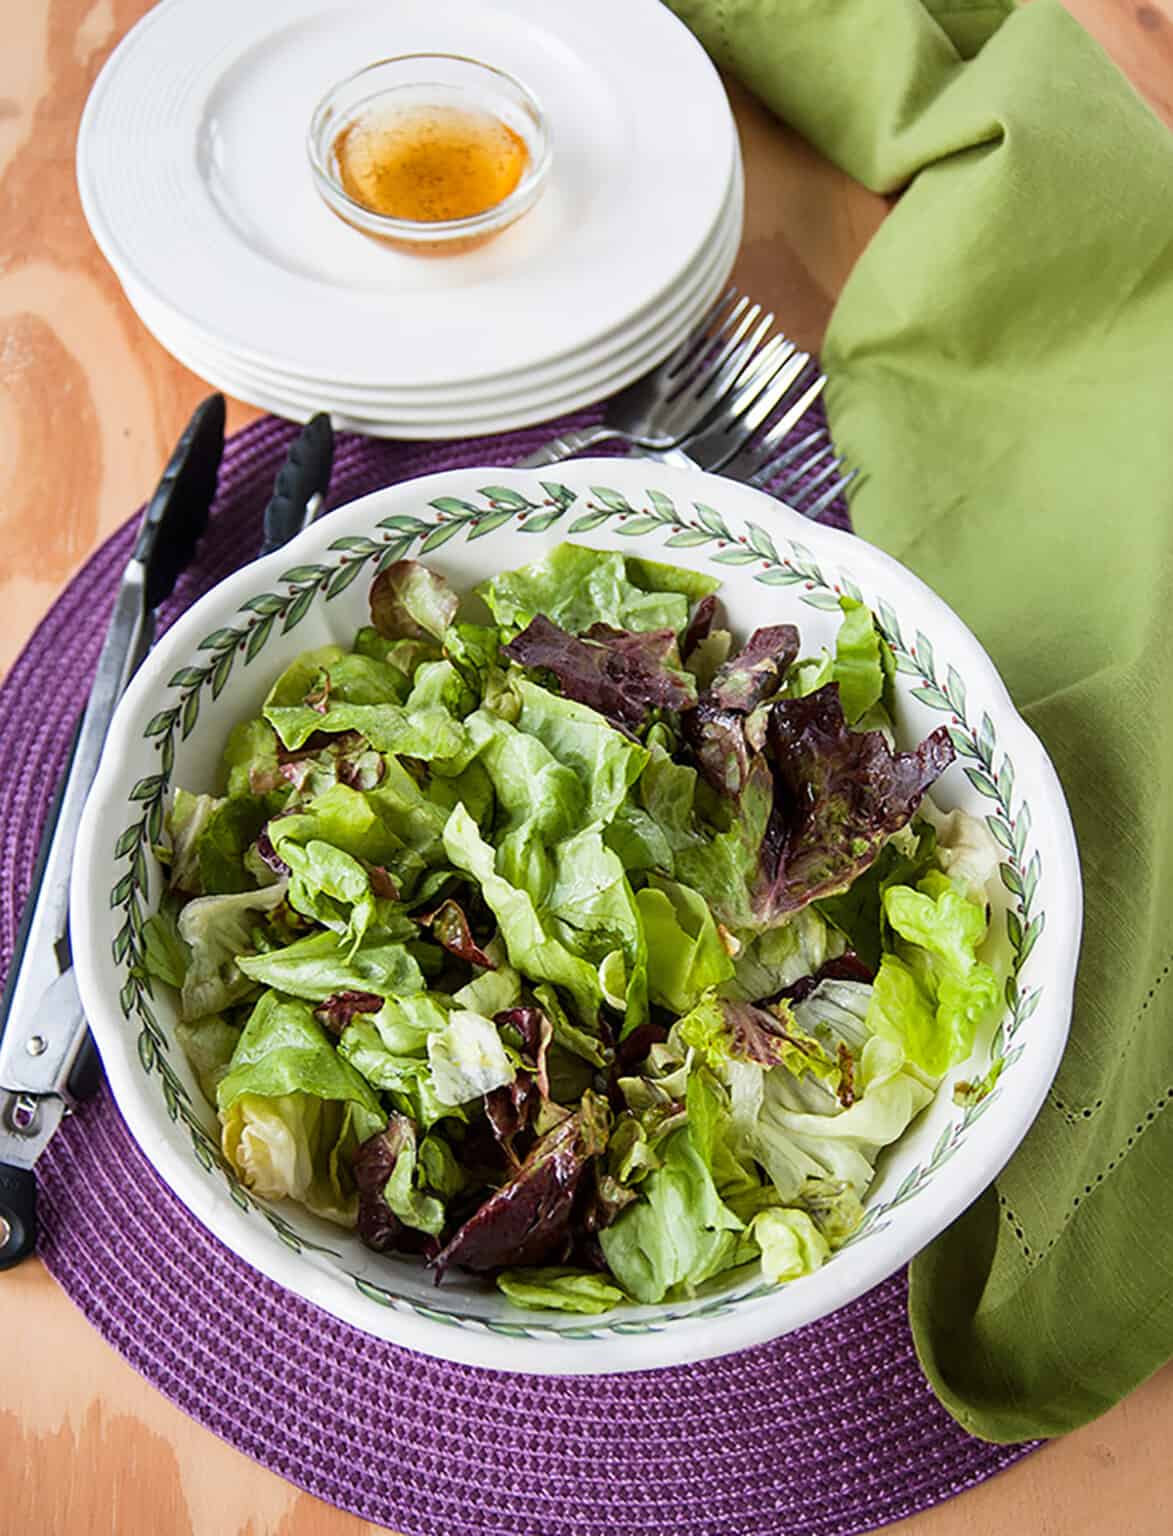 4 The Best Italian Green Salad With Homemade Dressing 1173x1536 